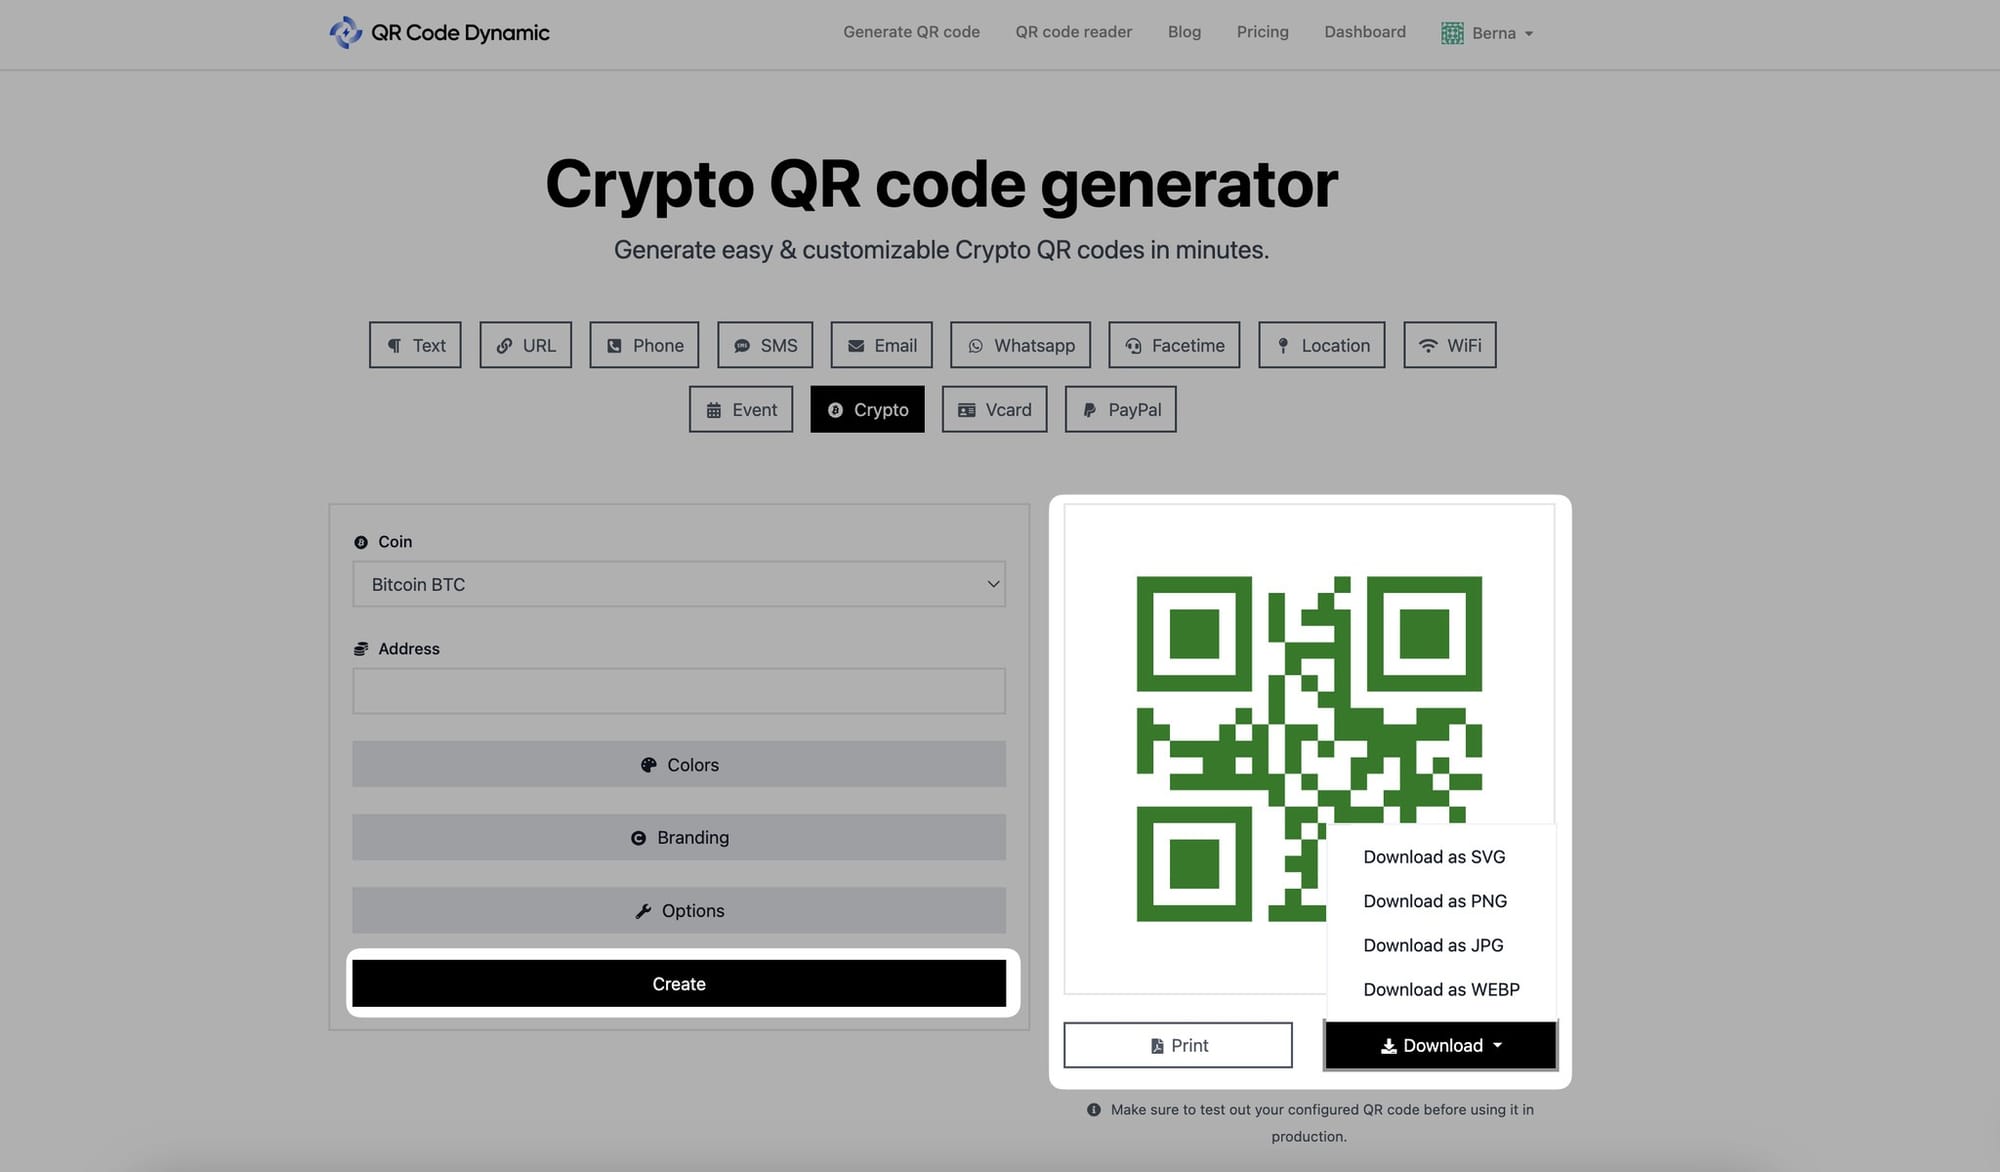 creating printing or downloading crypto qr code